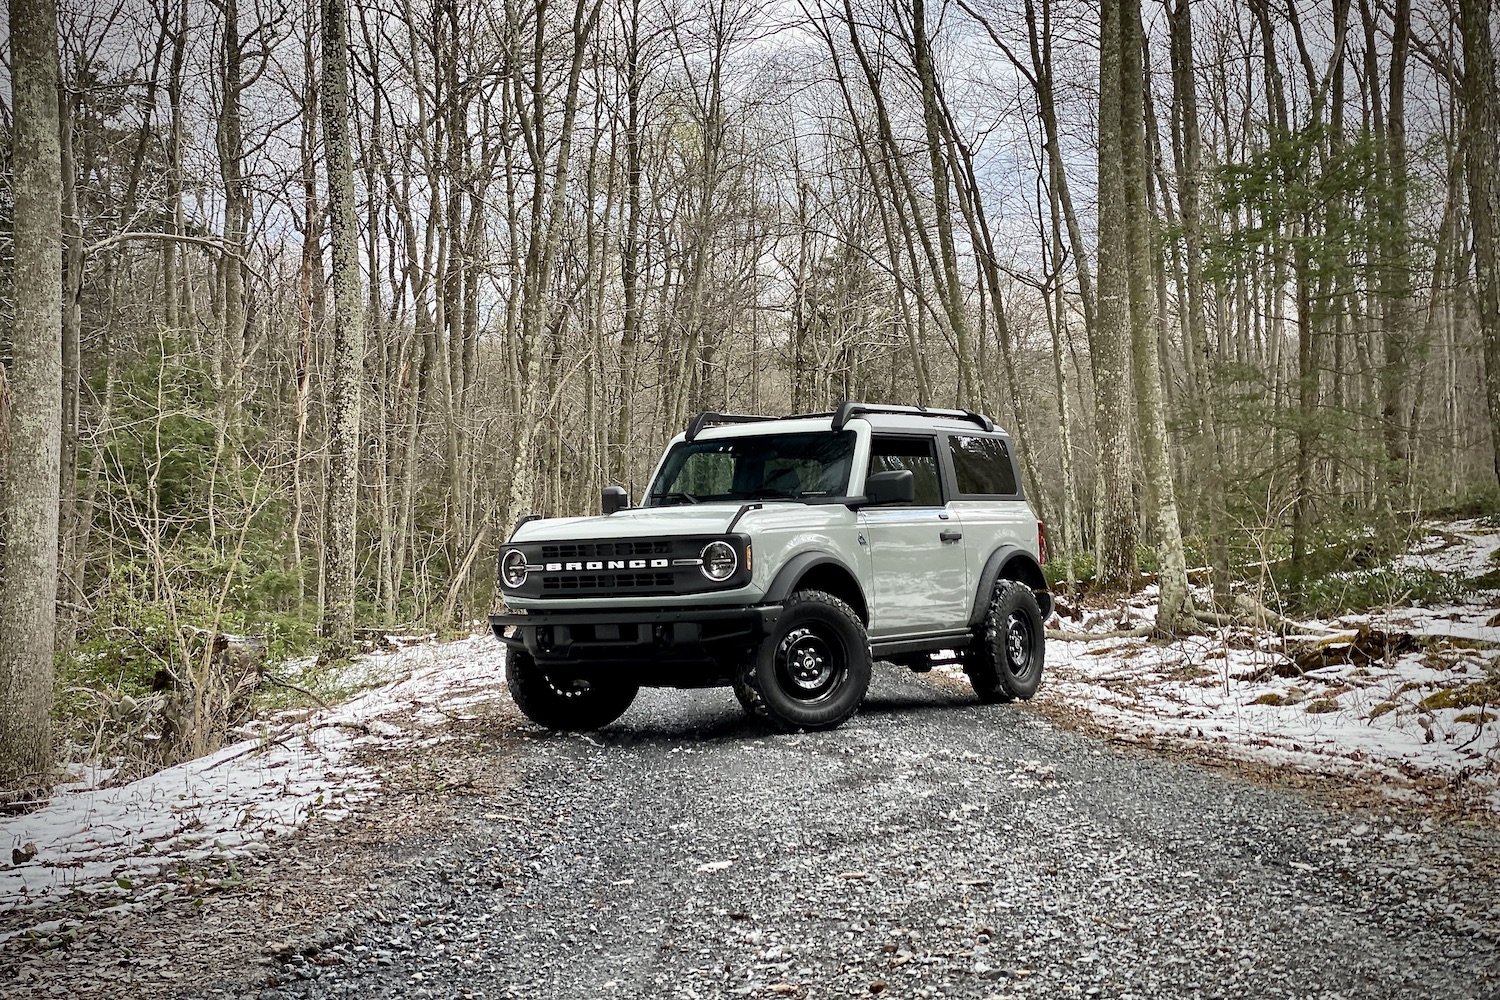 2021 Ford Bronco front end angle from driver's side on a gravel trail in front of bare trees with snow on the ground.